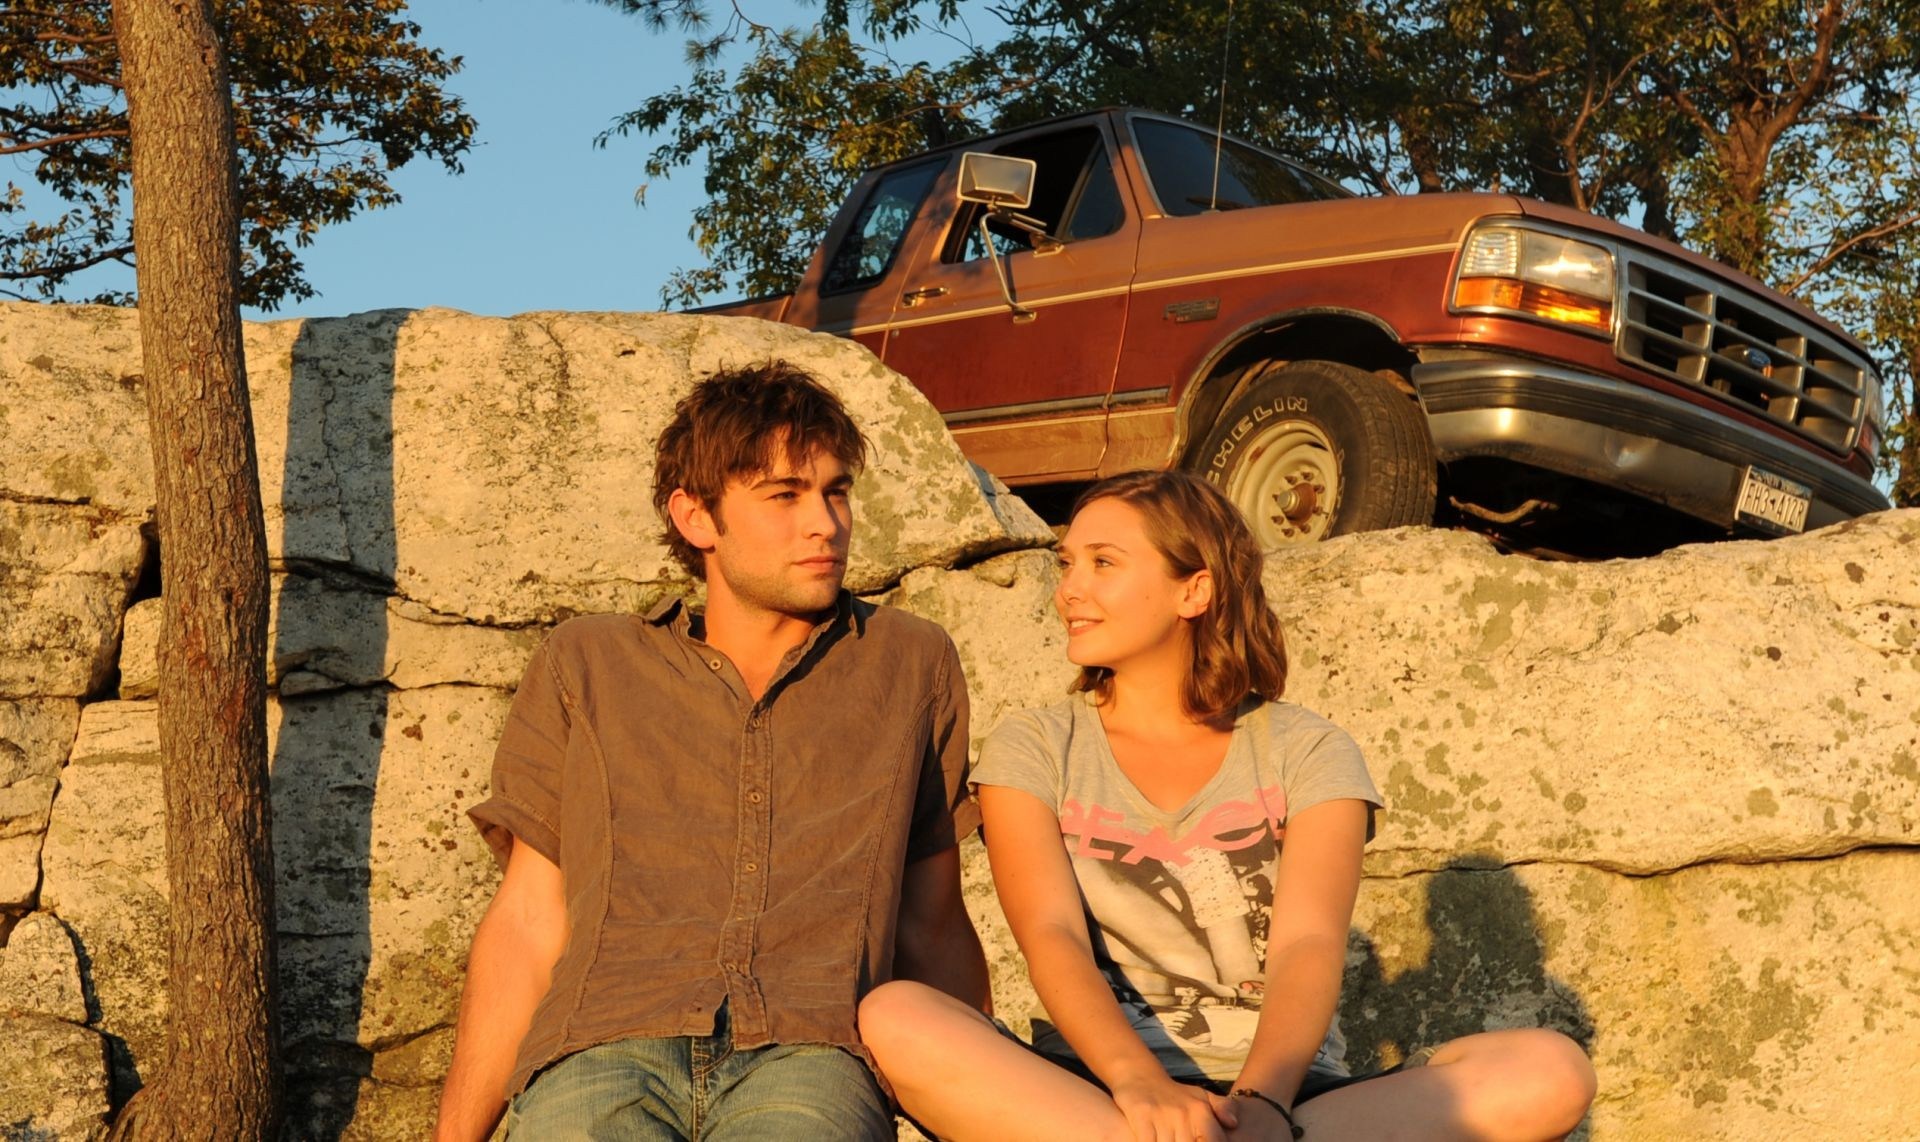 Chace Crawford stars as Cole and Elizabeth Olsen stars as Zoe in IFC Films' Peace, Love & Misunderstanding (2012). Photo credit by Jacob Hutchings.